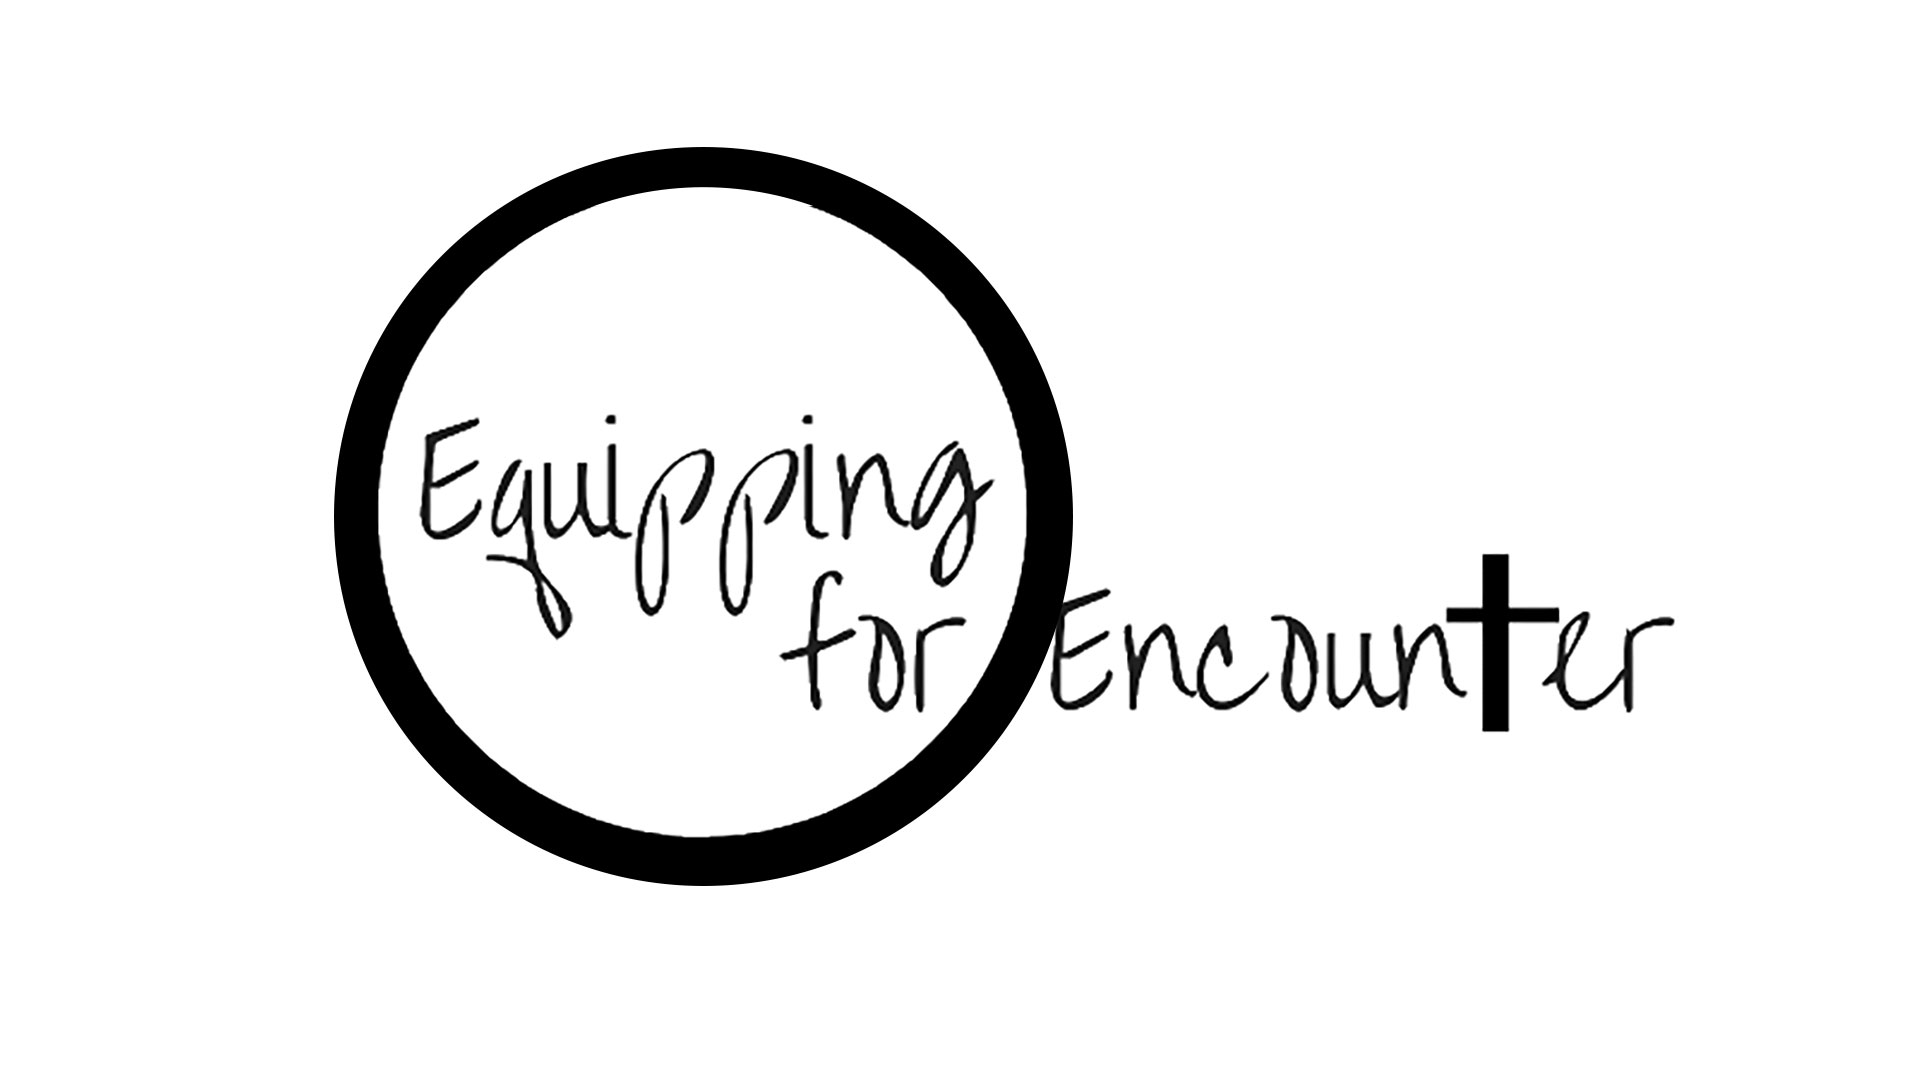 Blair and Karilyn Phillips (Equipping For Encounter) logo